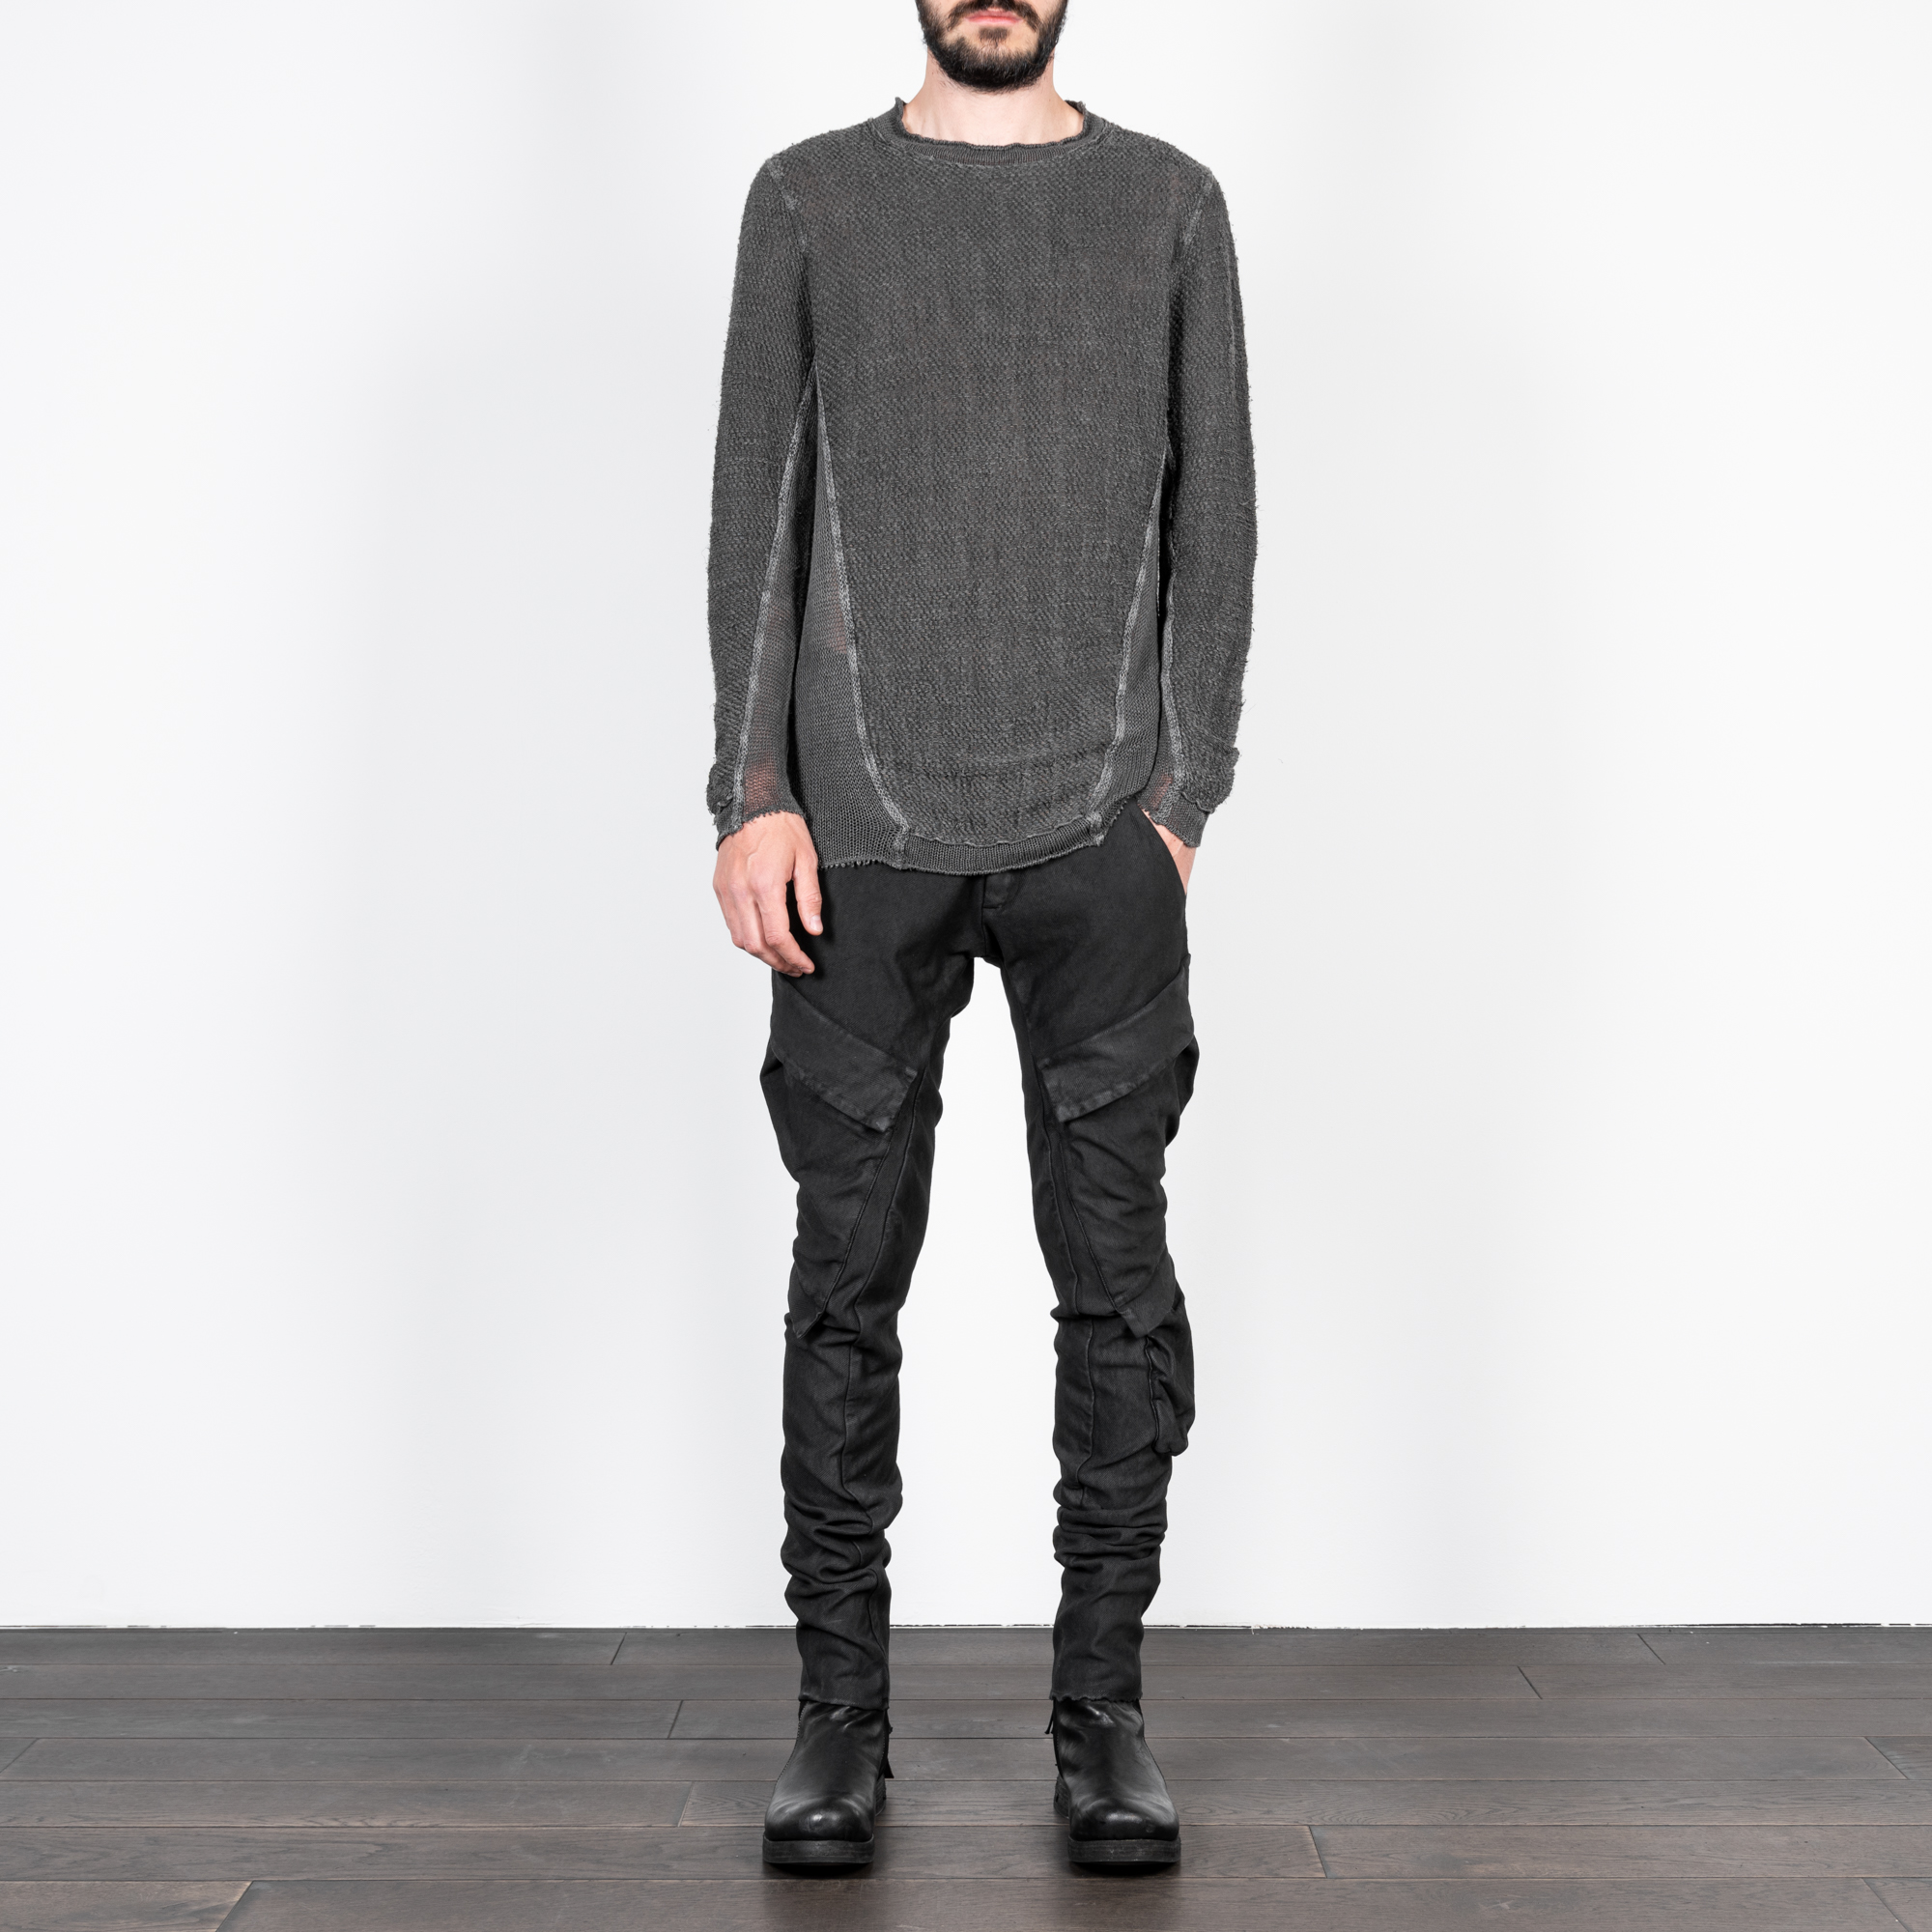 ROCK GREY RUGGED KNIT PULLOVER|wolfensson